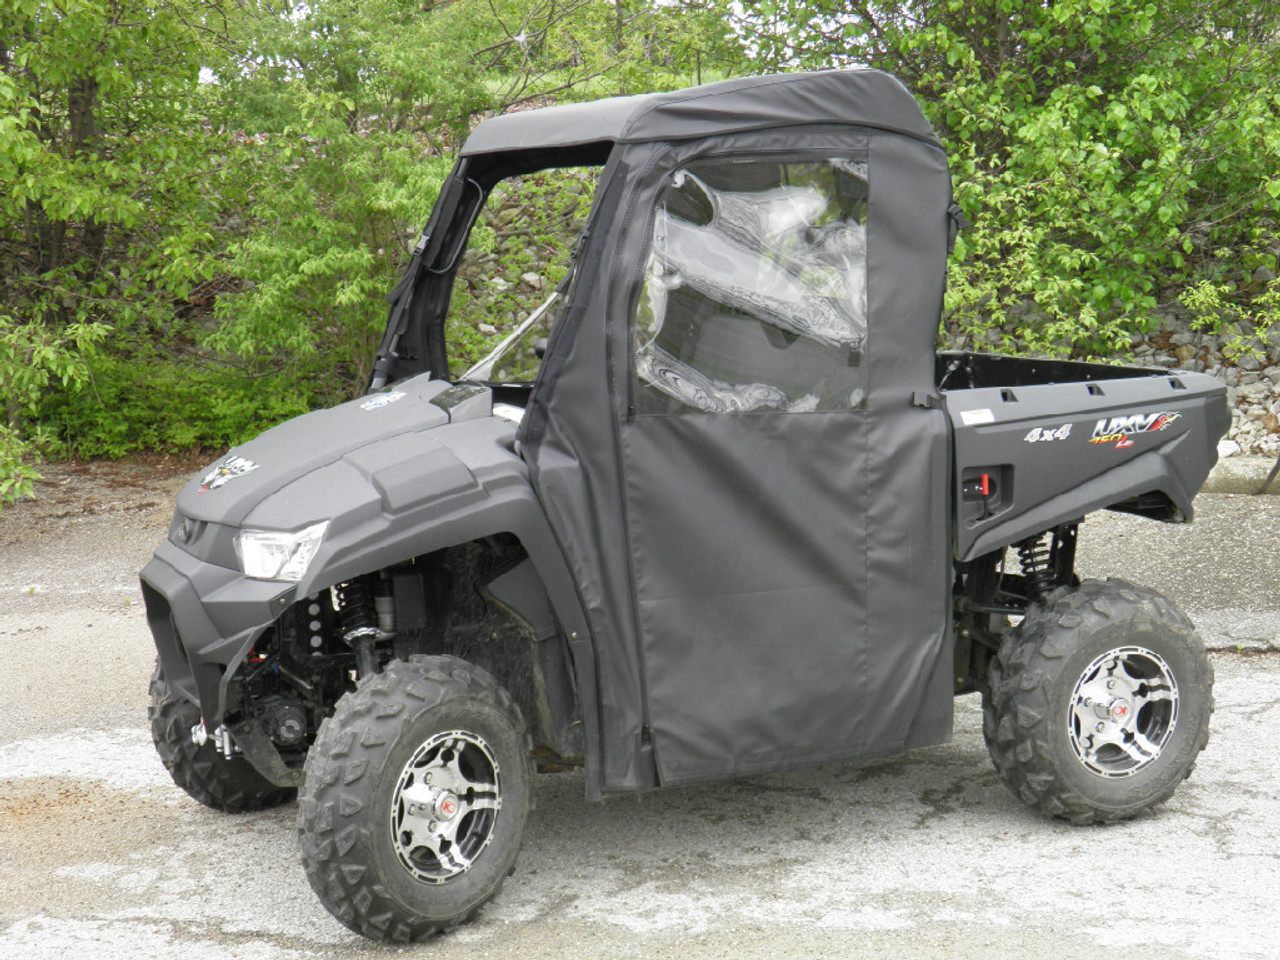 Kymco UXV 450i Full Cab Enclosure for Hard Windshield side angle view